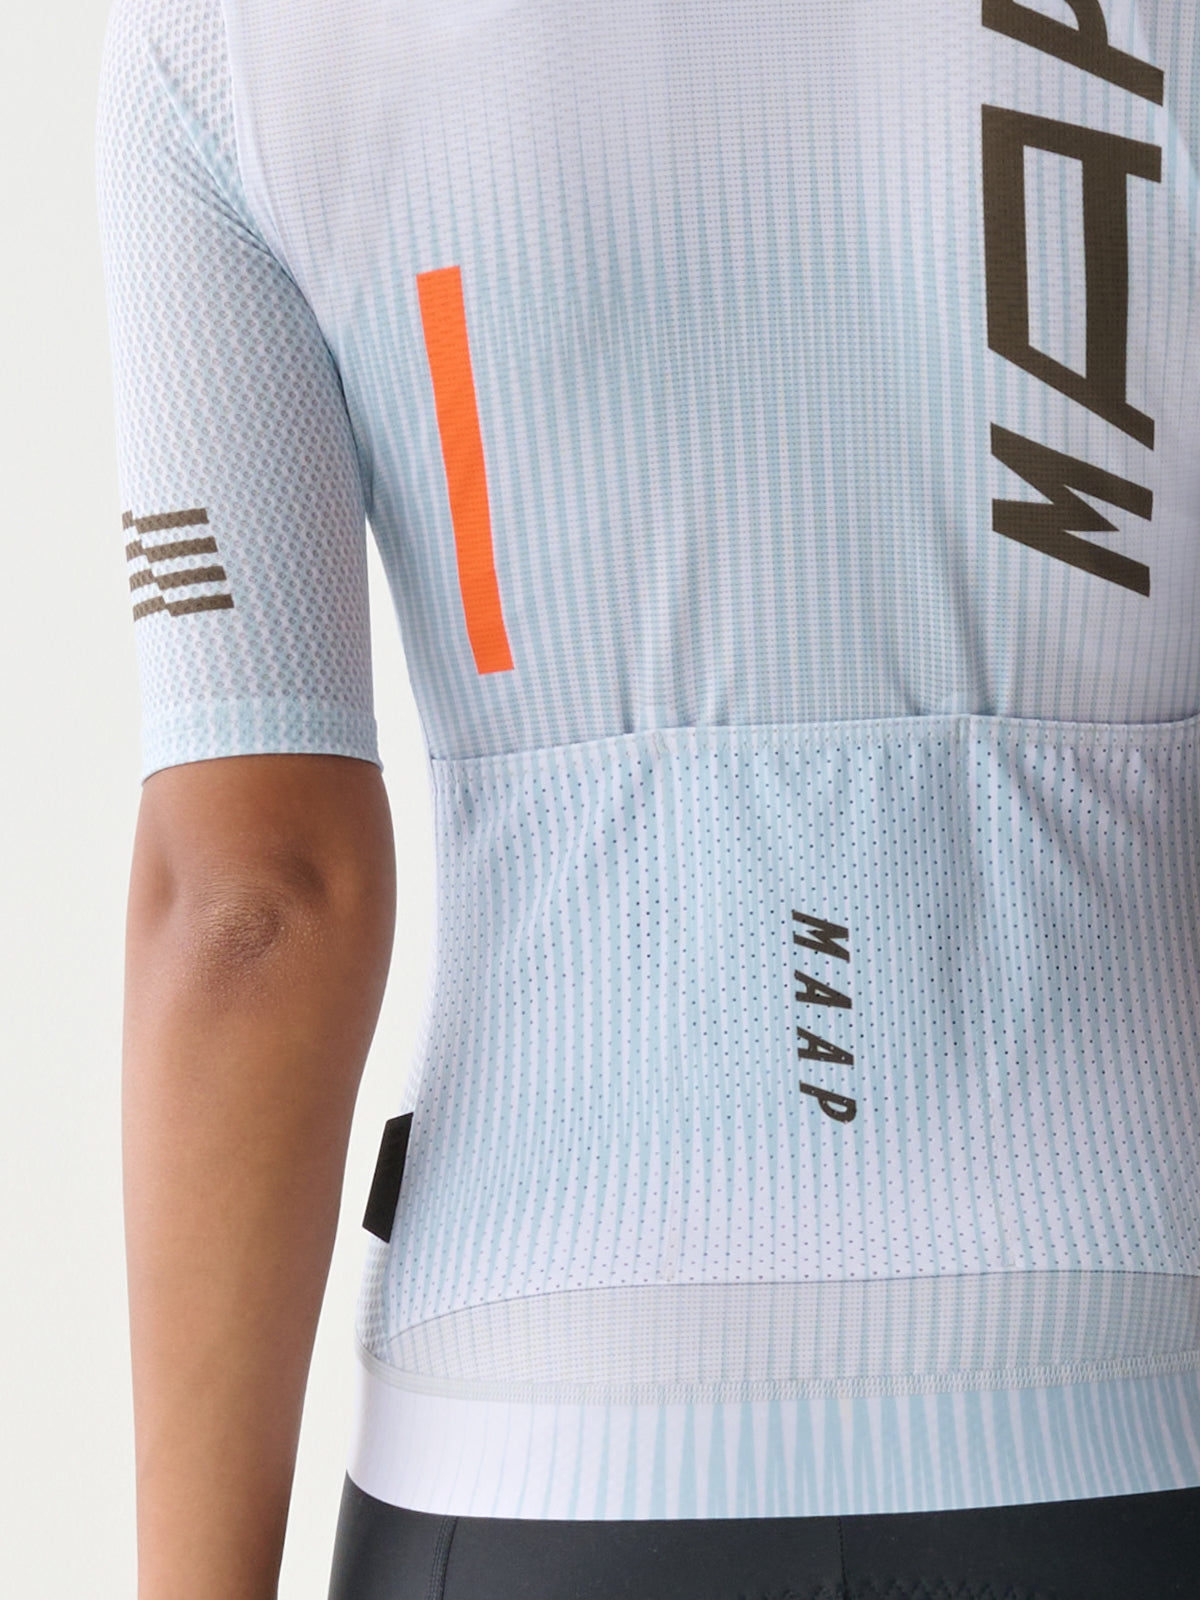 Women's Privateer F.O Pro Jersey